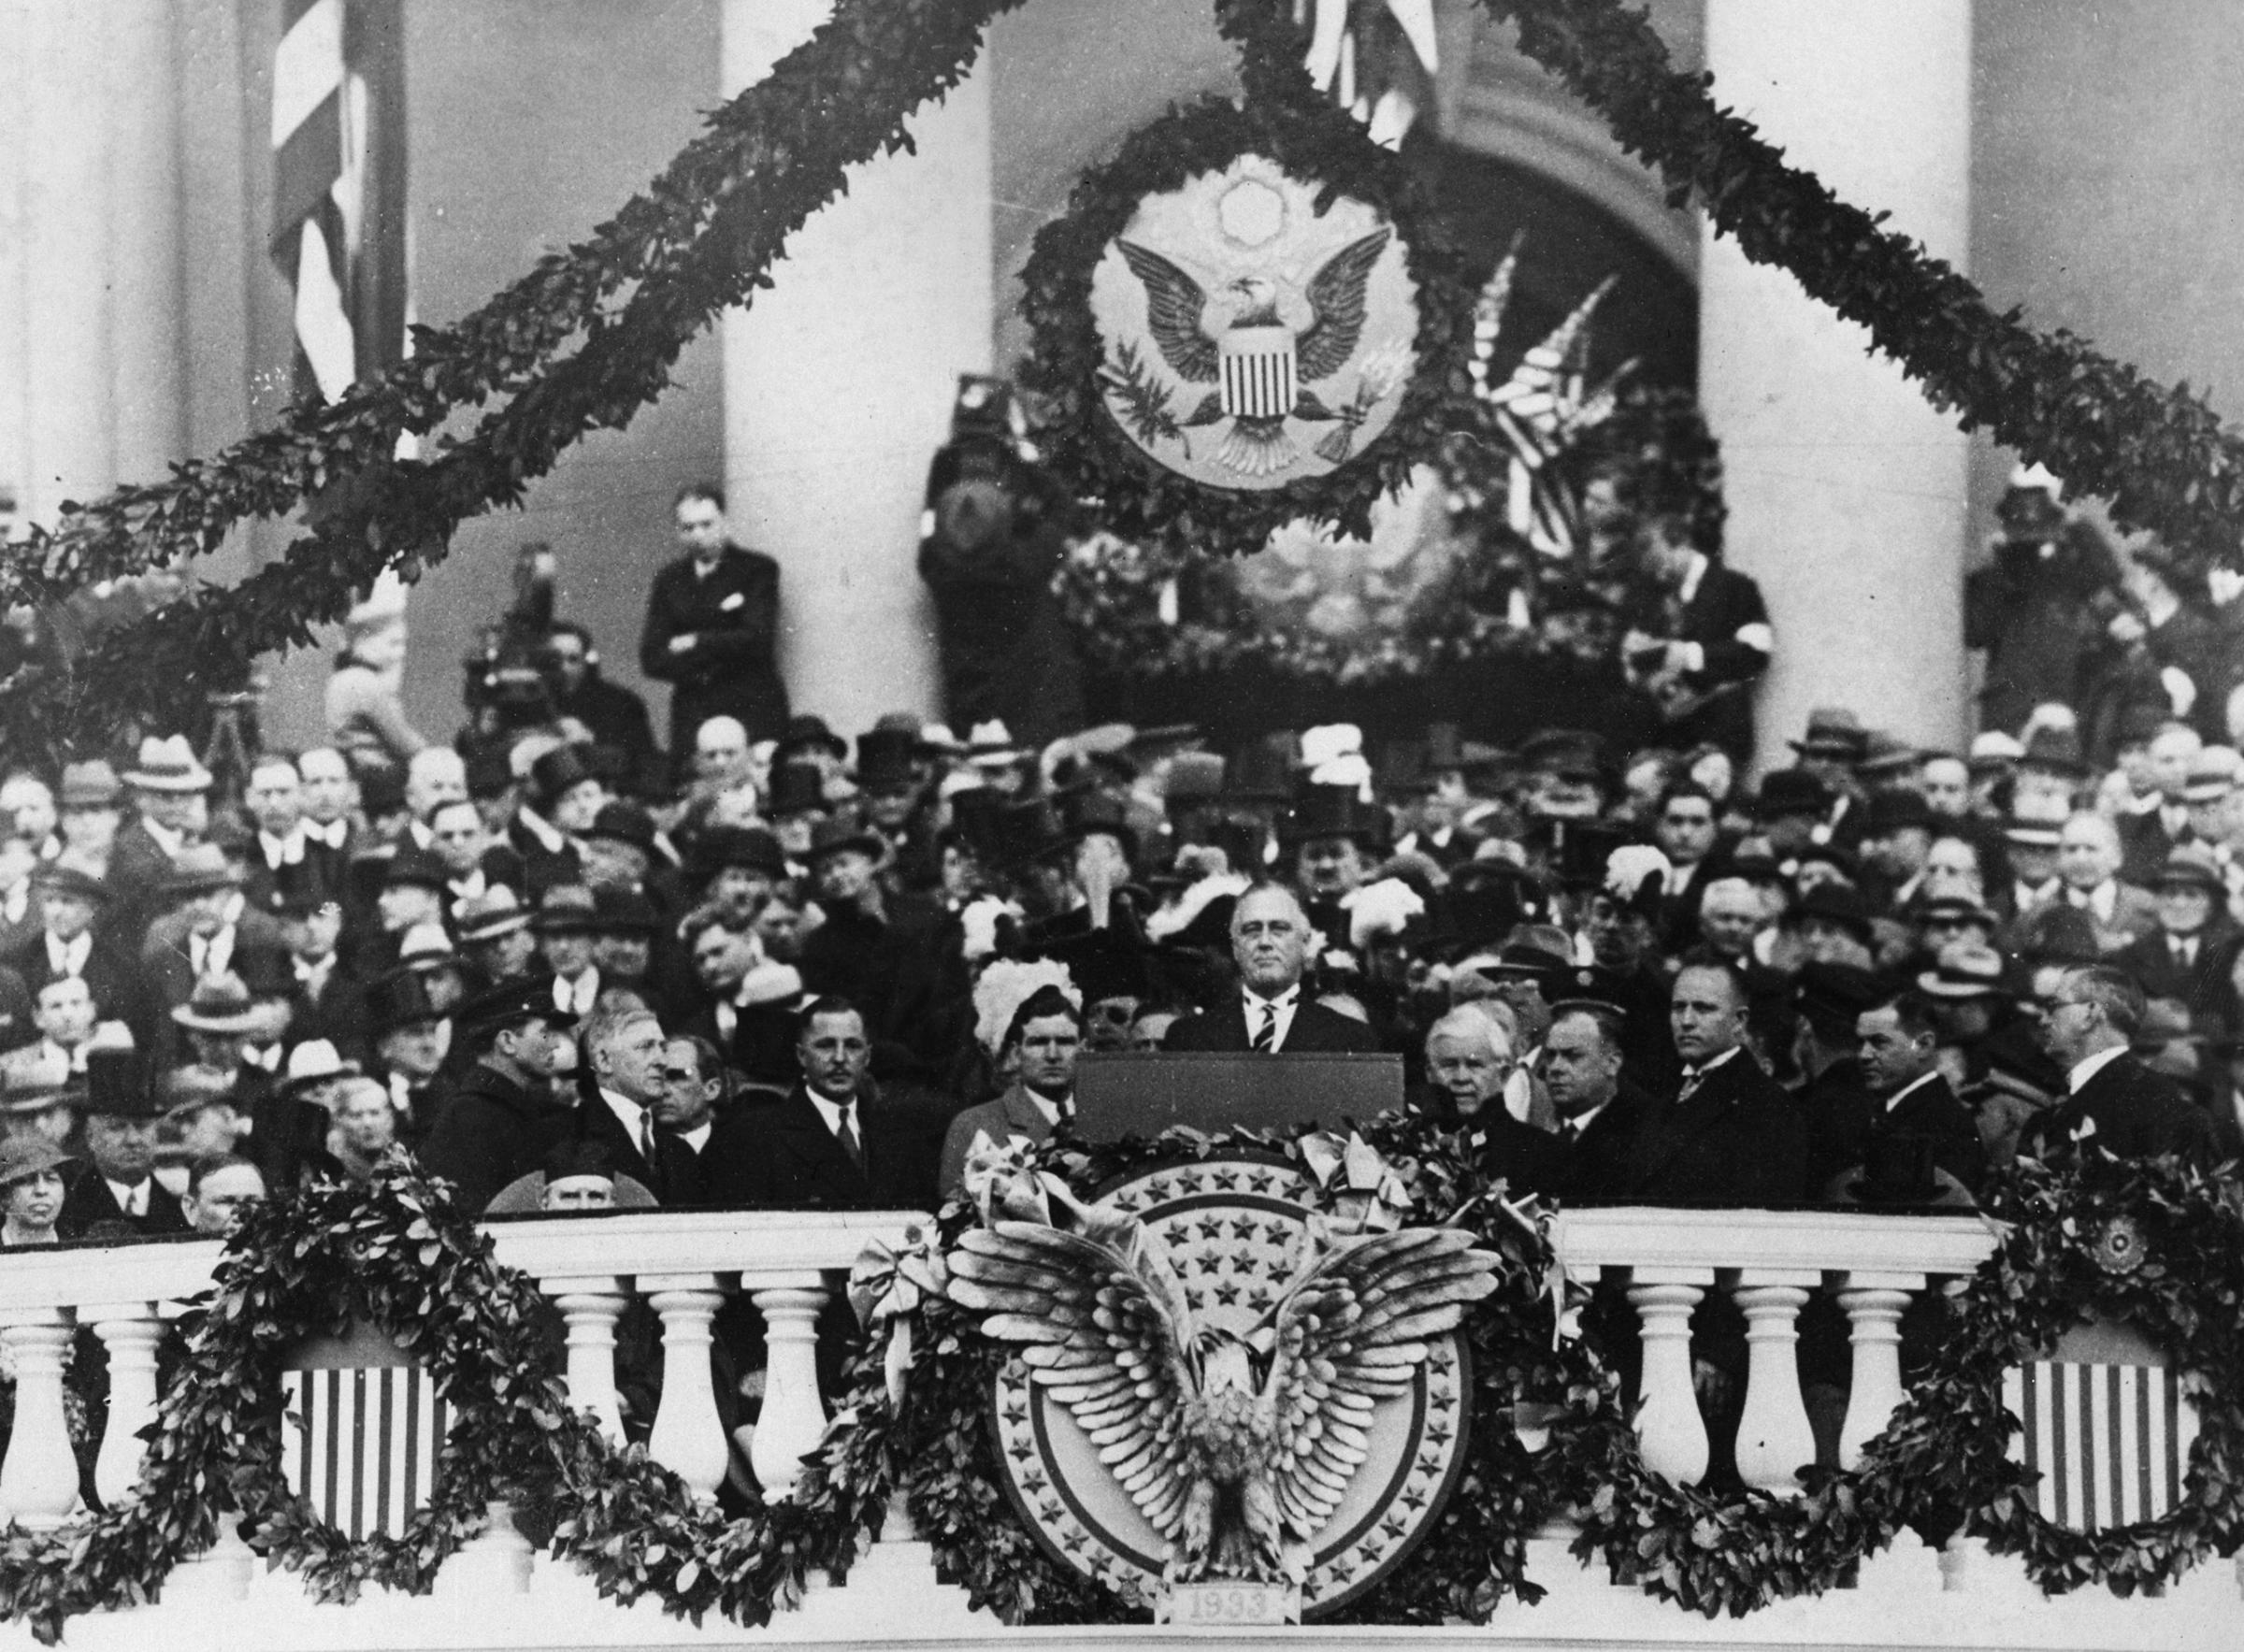 Franklin Delano Roosevelt giving his first inaugural address as 32nd President, 1933.